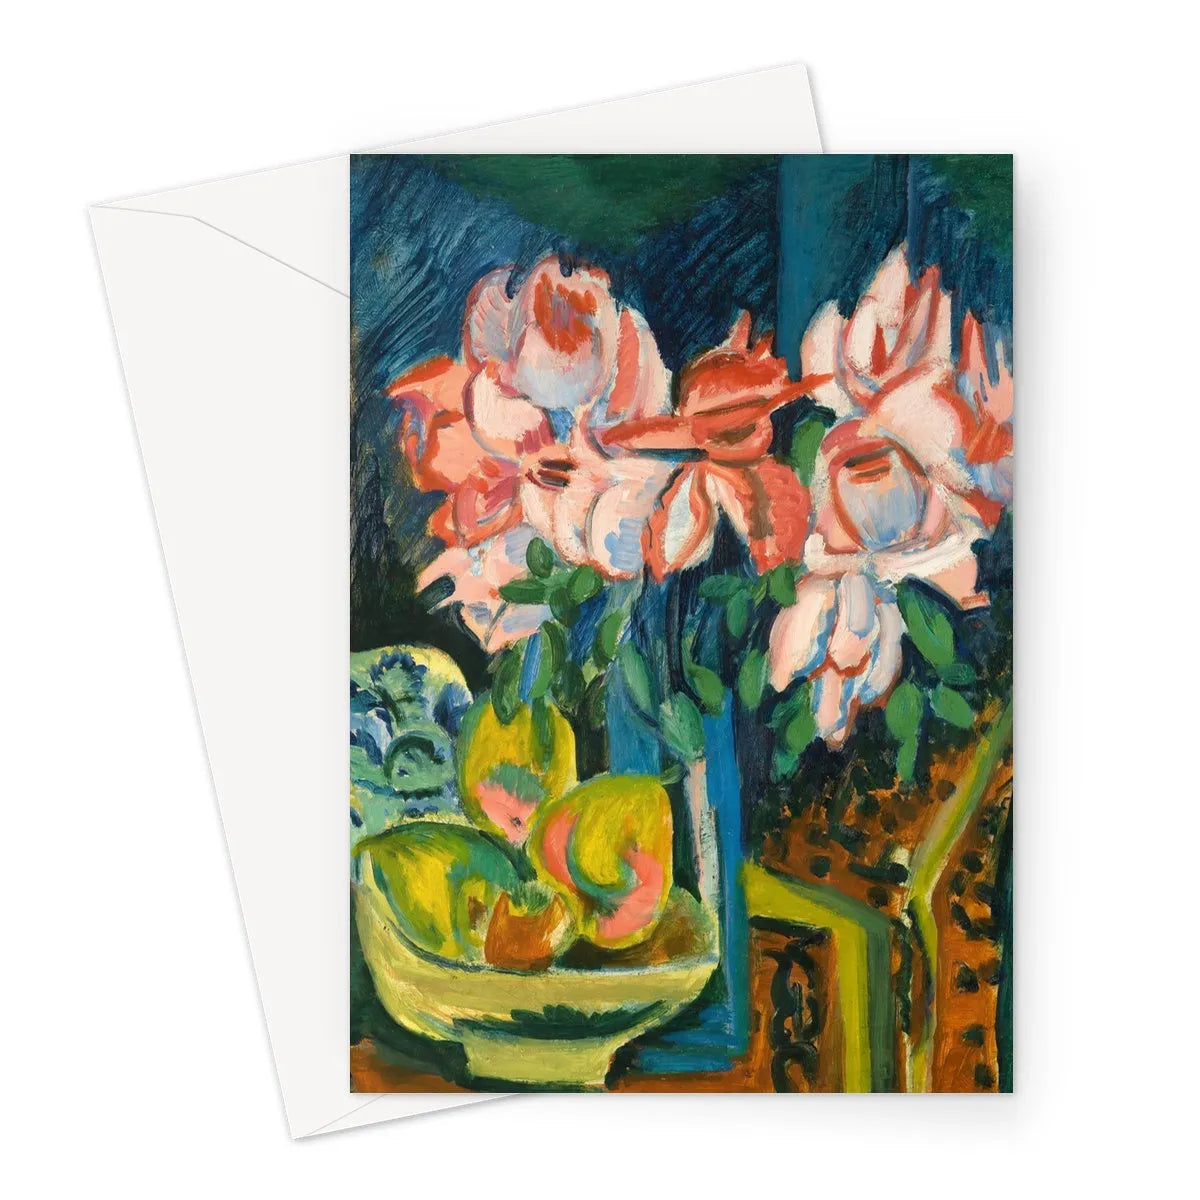 Pink Roses By Ernst Ludwig Kirchner Greeting Card - A5 Portrait / 1 Card - Greeting & Note Cards - Aesthetic Art